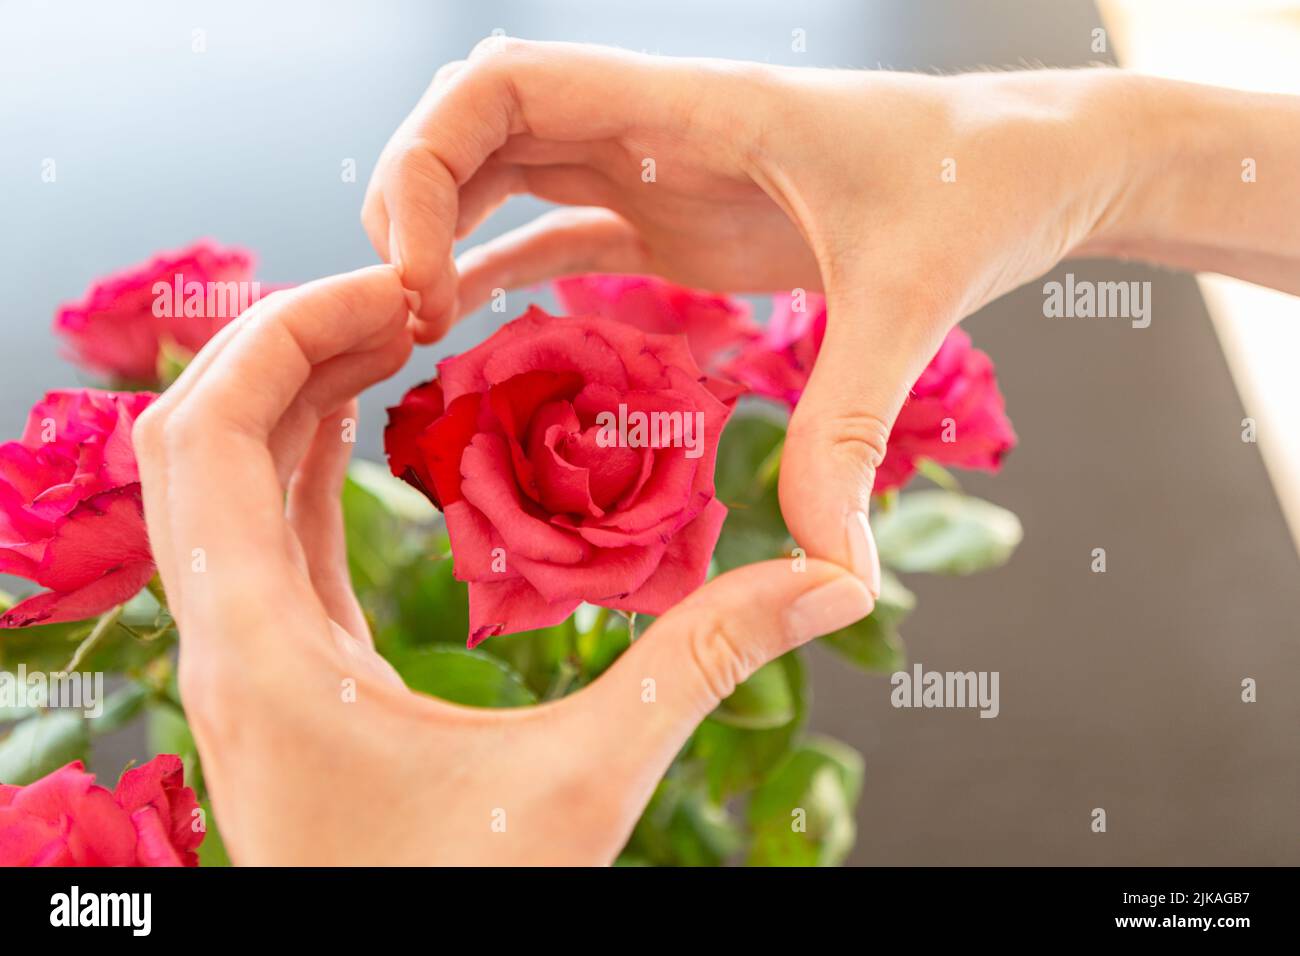 Hands showing heart above a rose Stock Photo